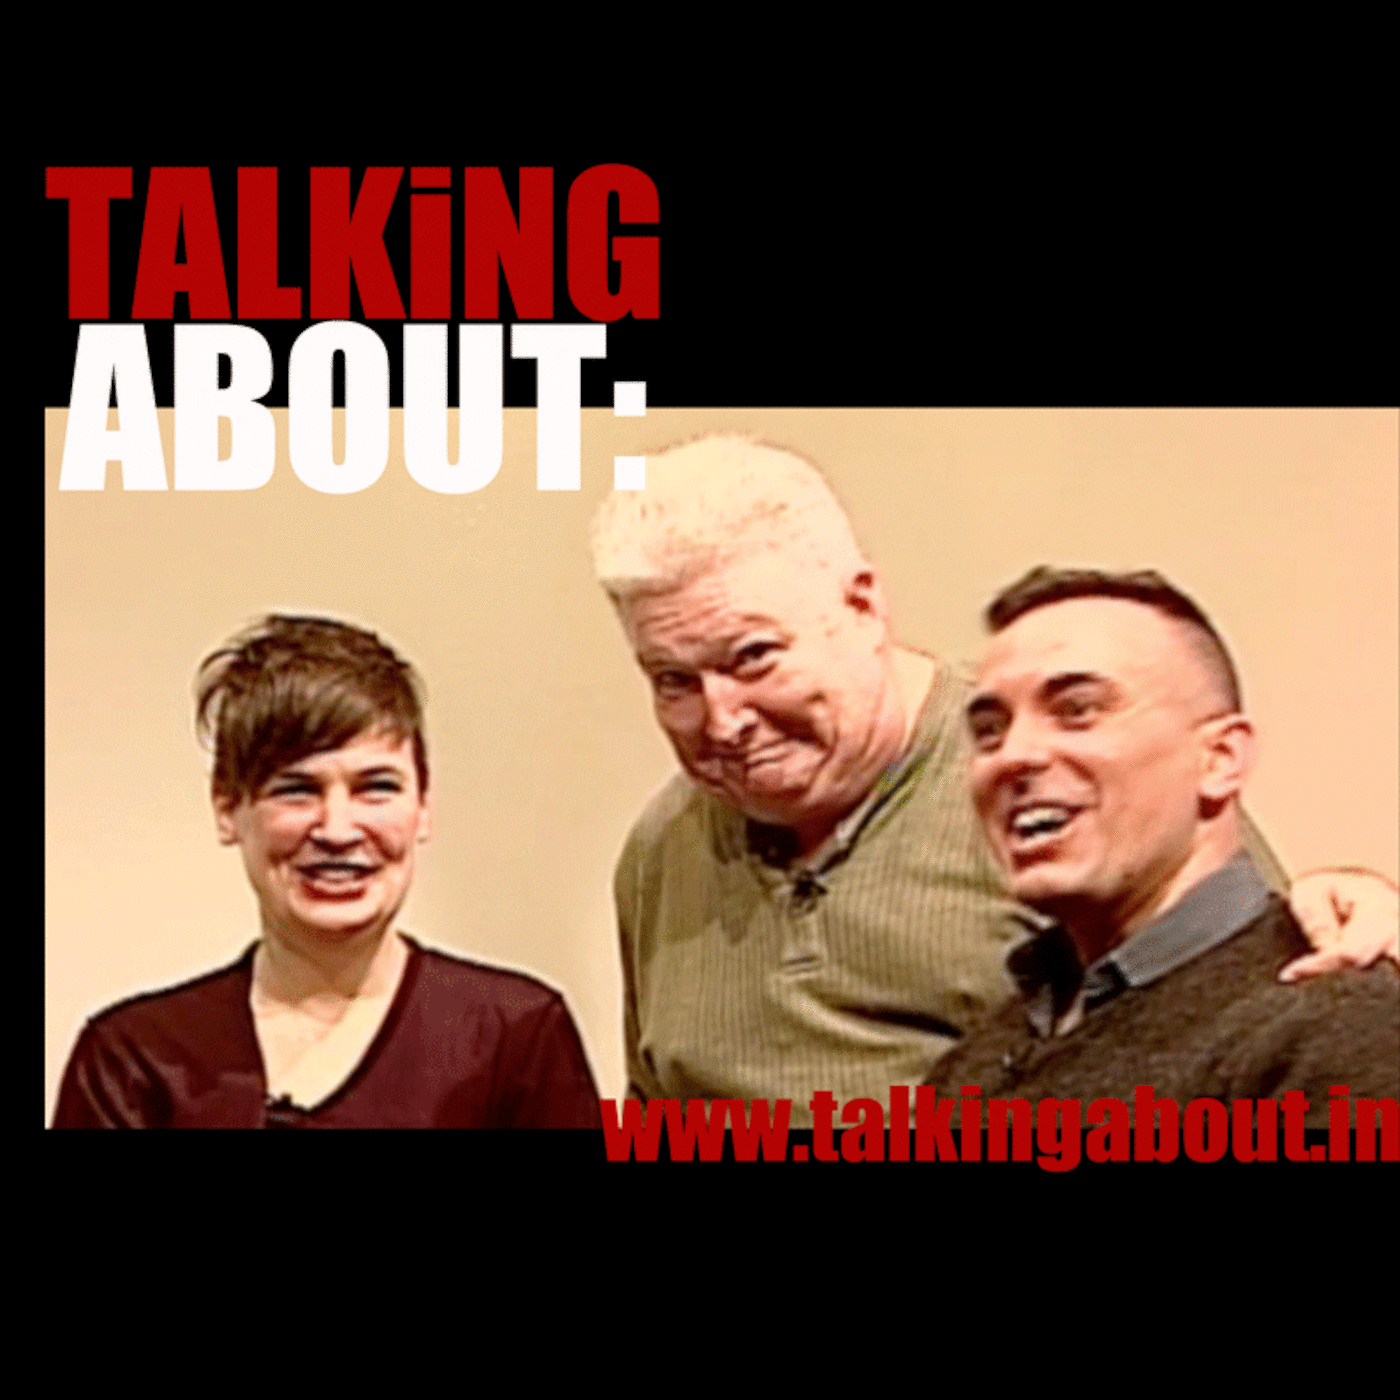 Talking About: Table Talk January 2013